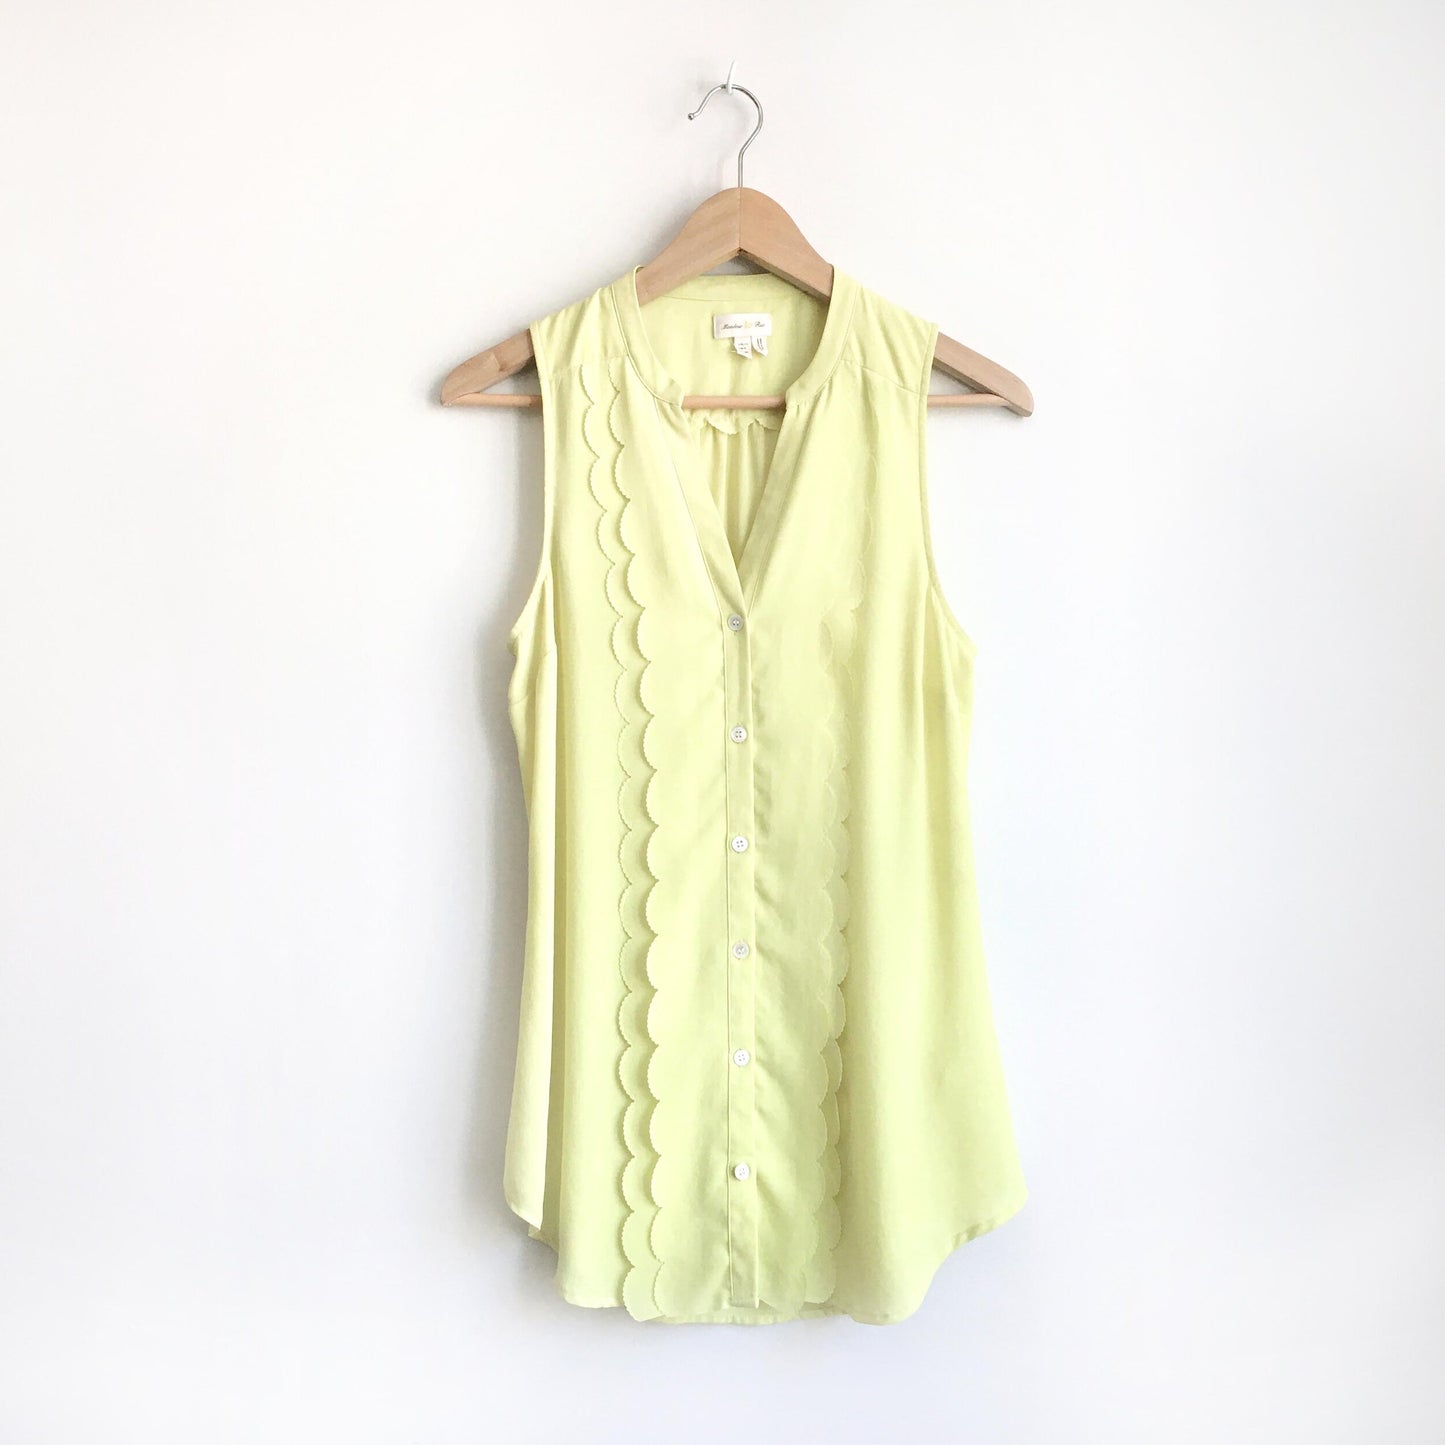 Meadow Rue sleeveless scallop blouse - size 6